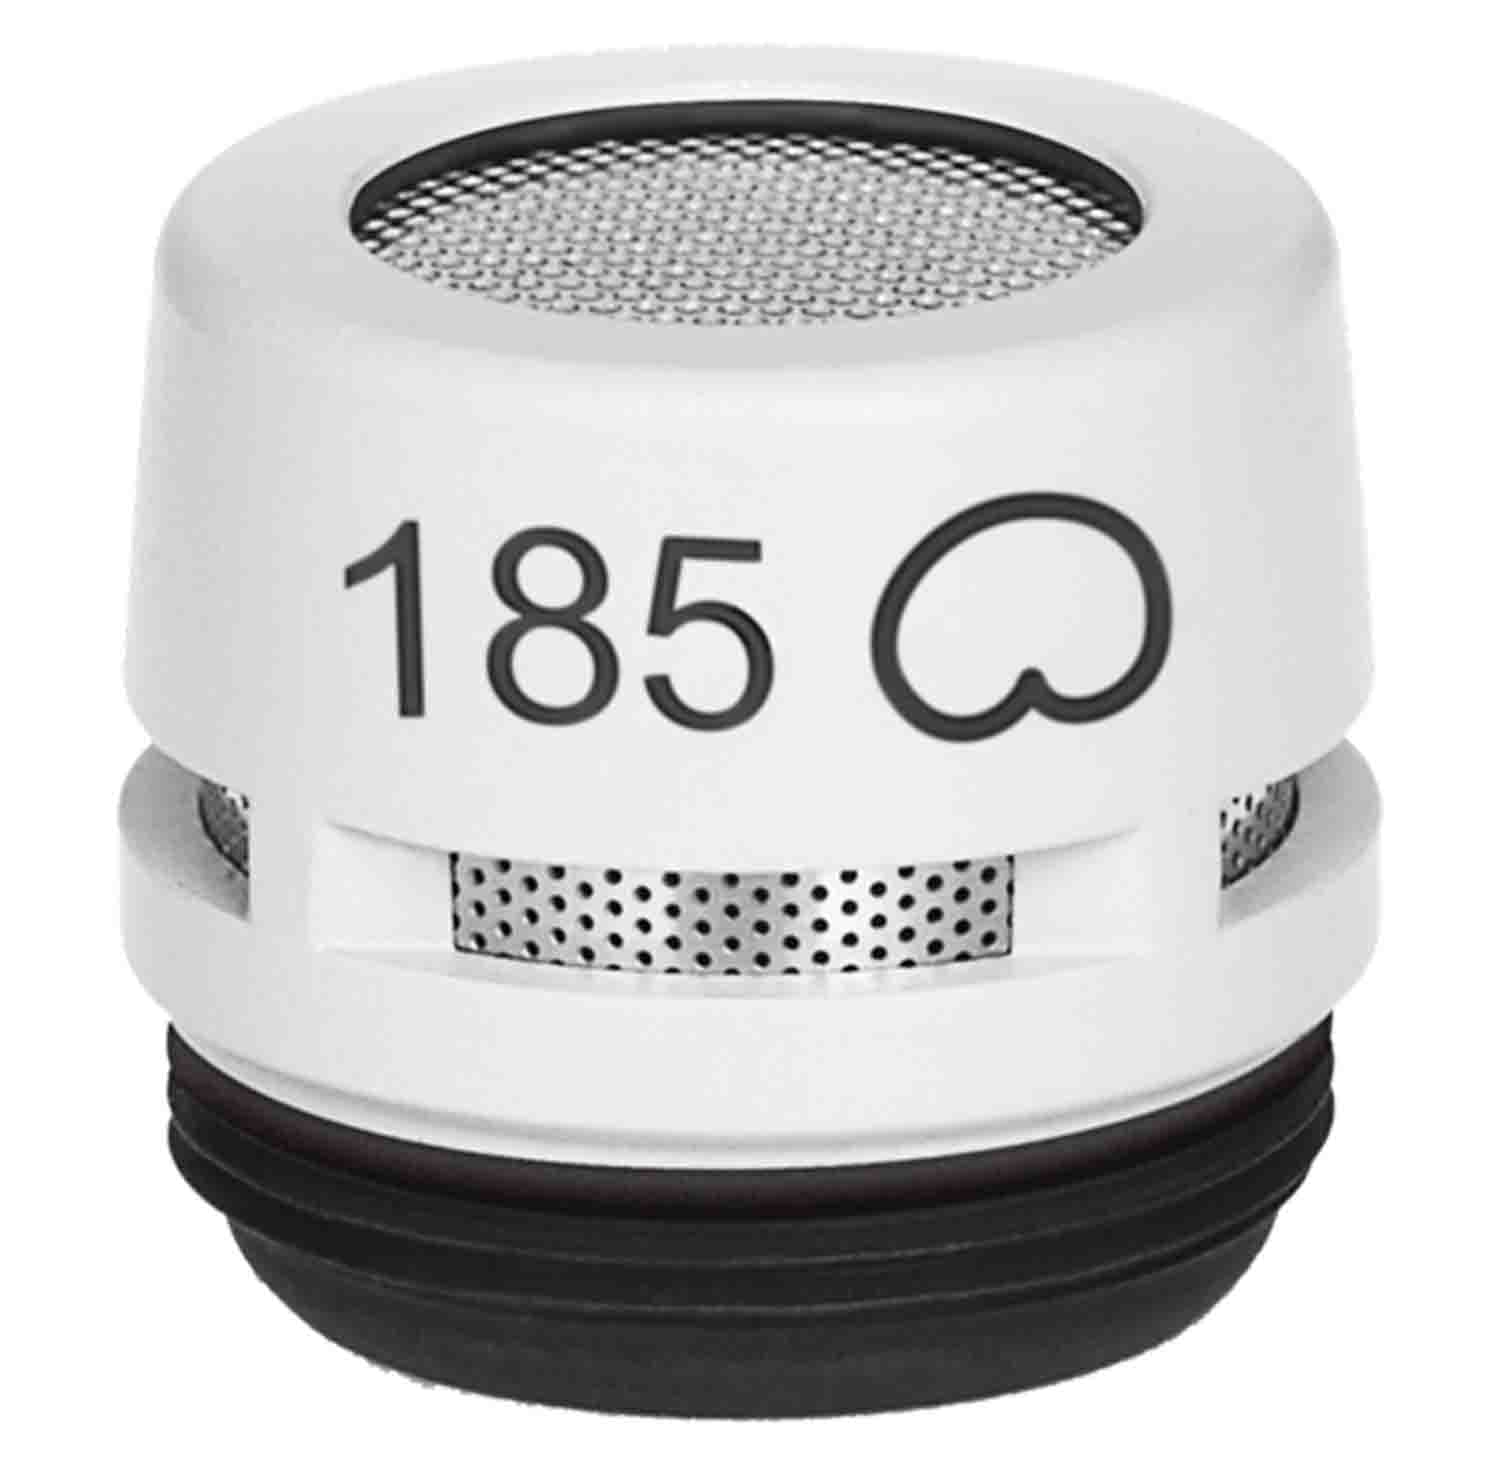 Shure R185W-A Cardioid Cartridges for Microflex Series Microphones - White - Hollywood DJ